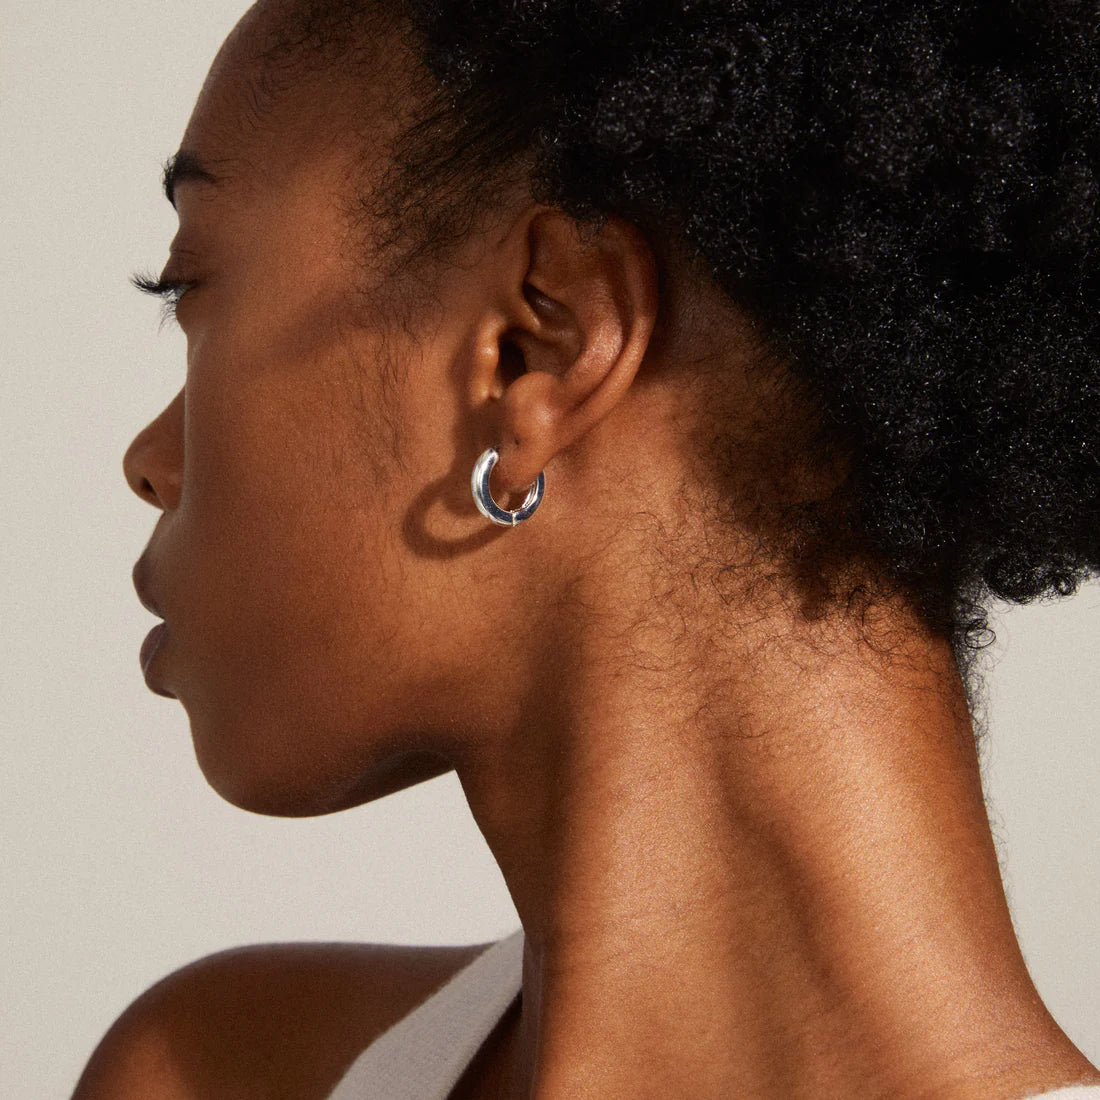 Tyra, recycled chunky hoop earrings, silver-plated